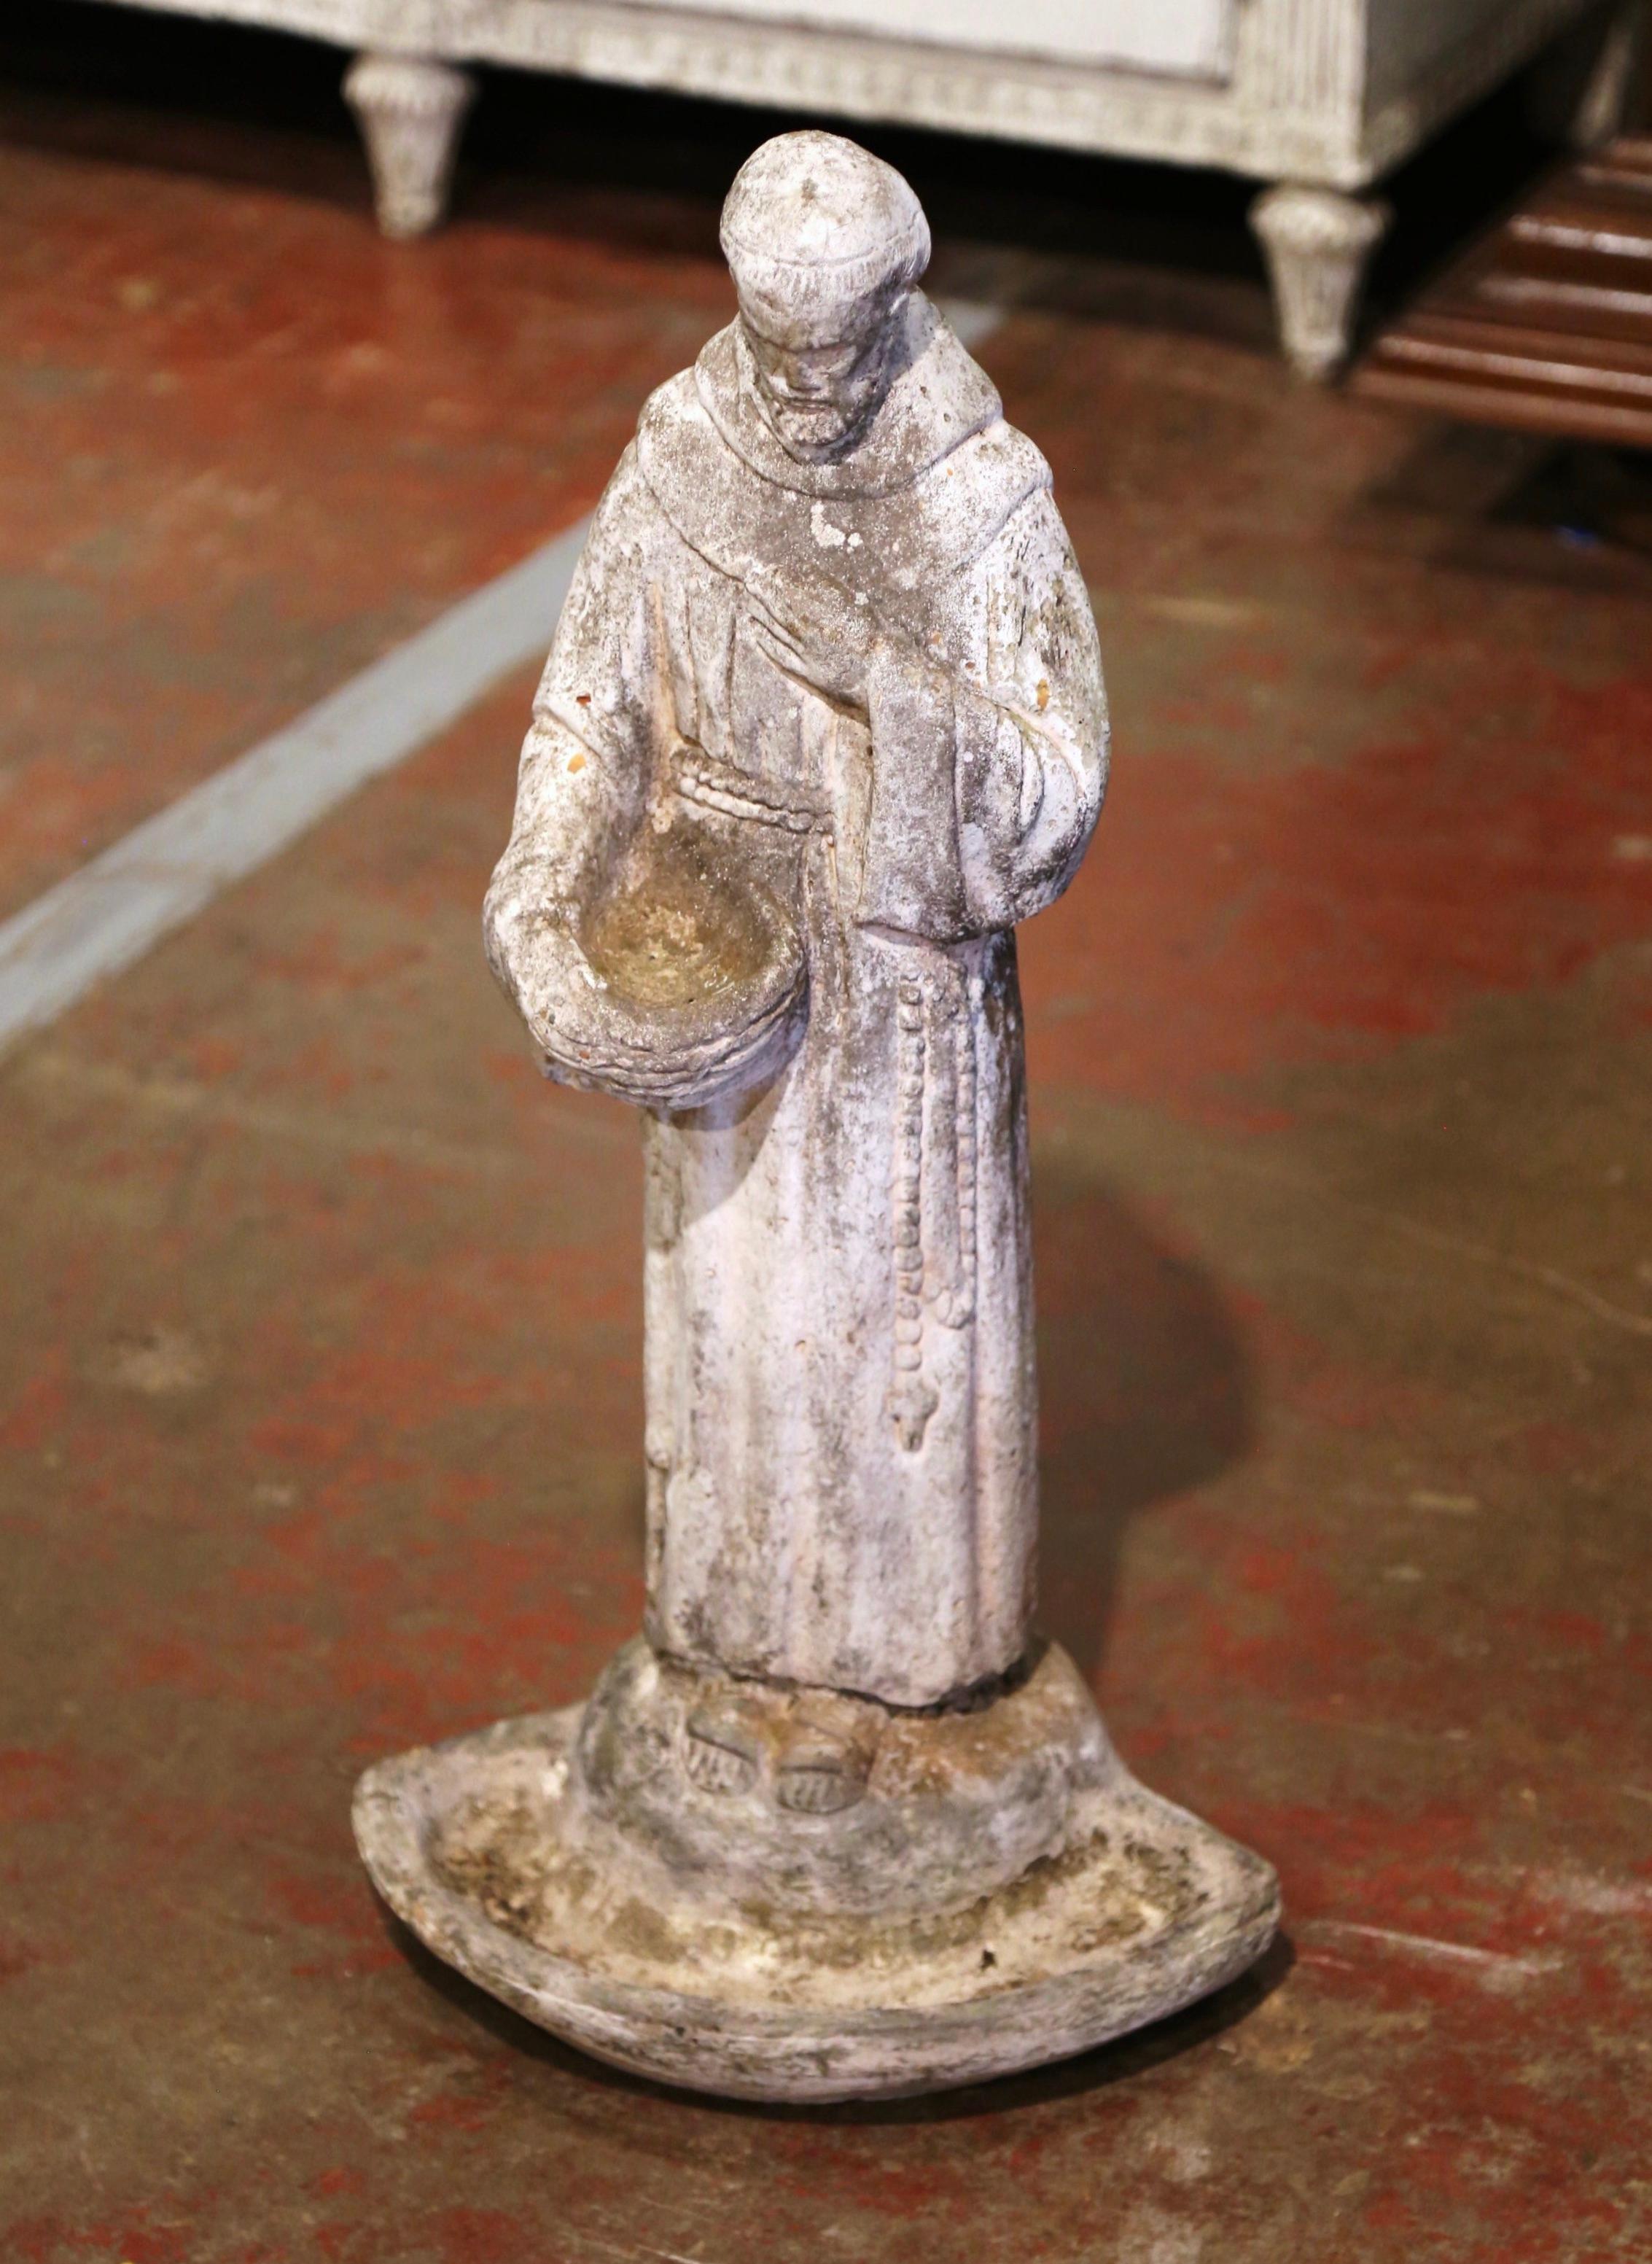 Decorate an outdoor garden with this antique bird bath statue featuring Saint Francis, the saint patron of animals. Crafted in France circa 1880, the carved statue depicts the Saint dressed in cassock, holding a bowl to feed the birds. The garden